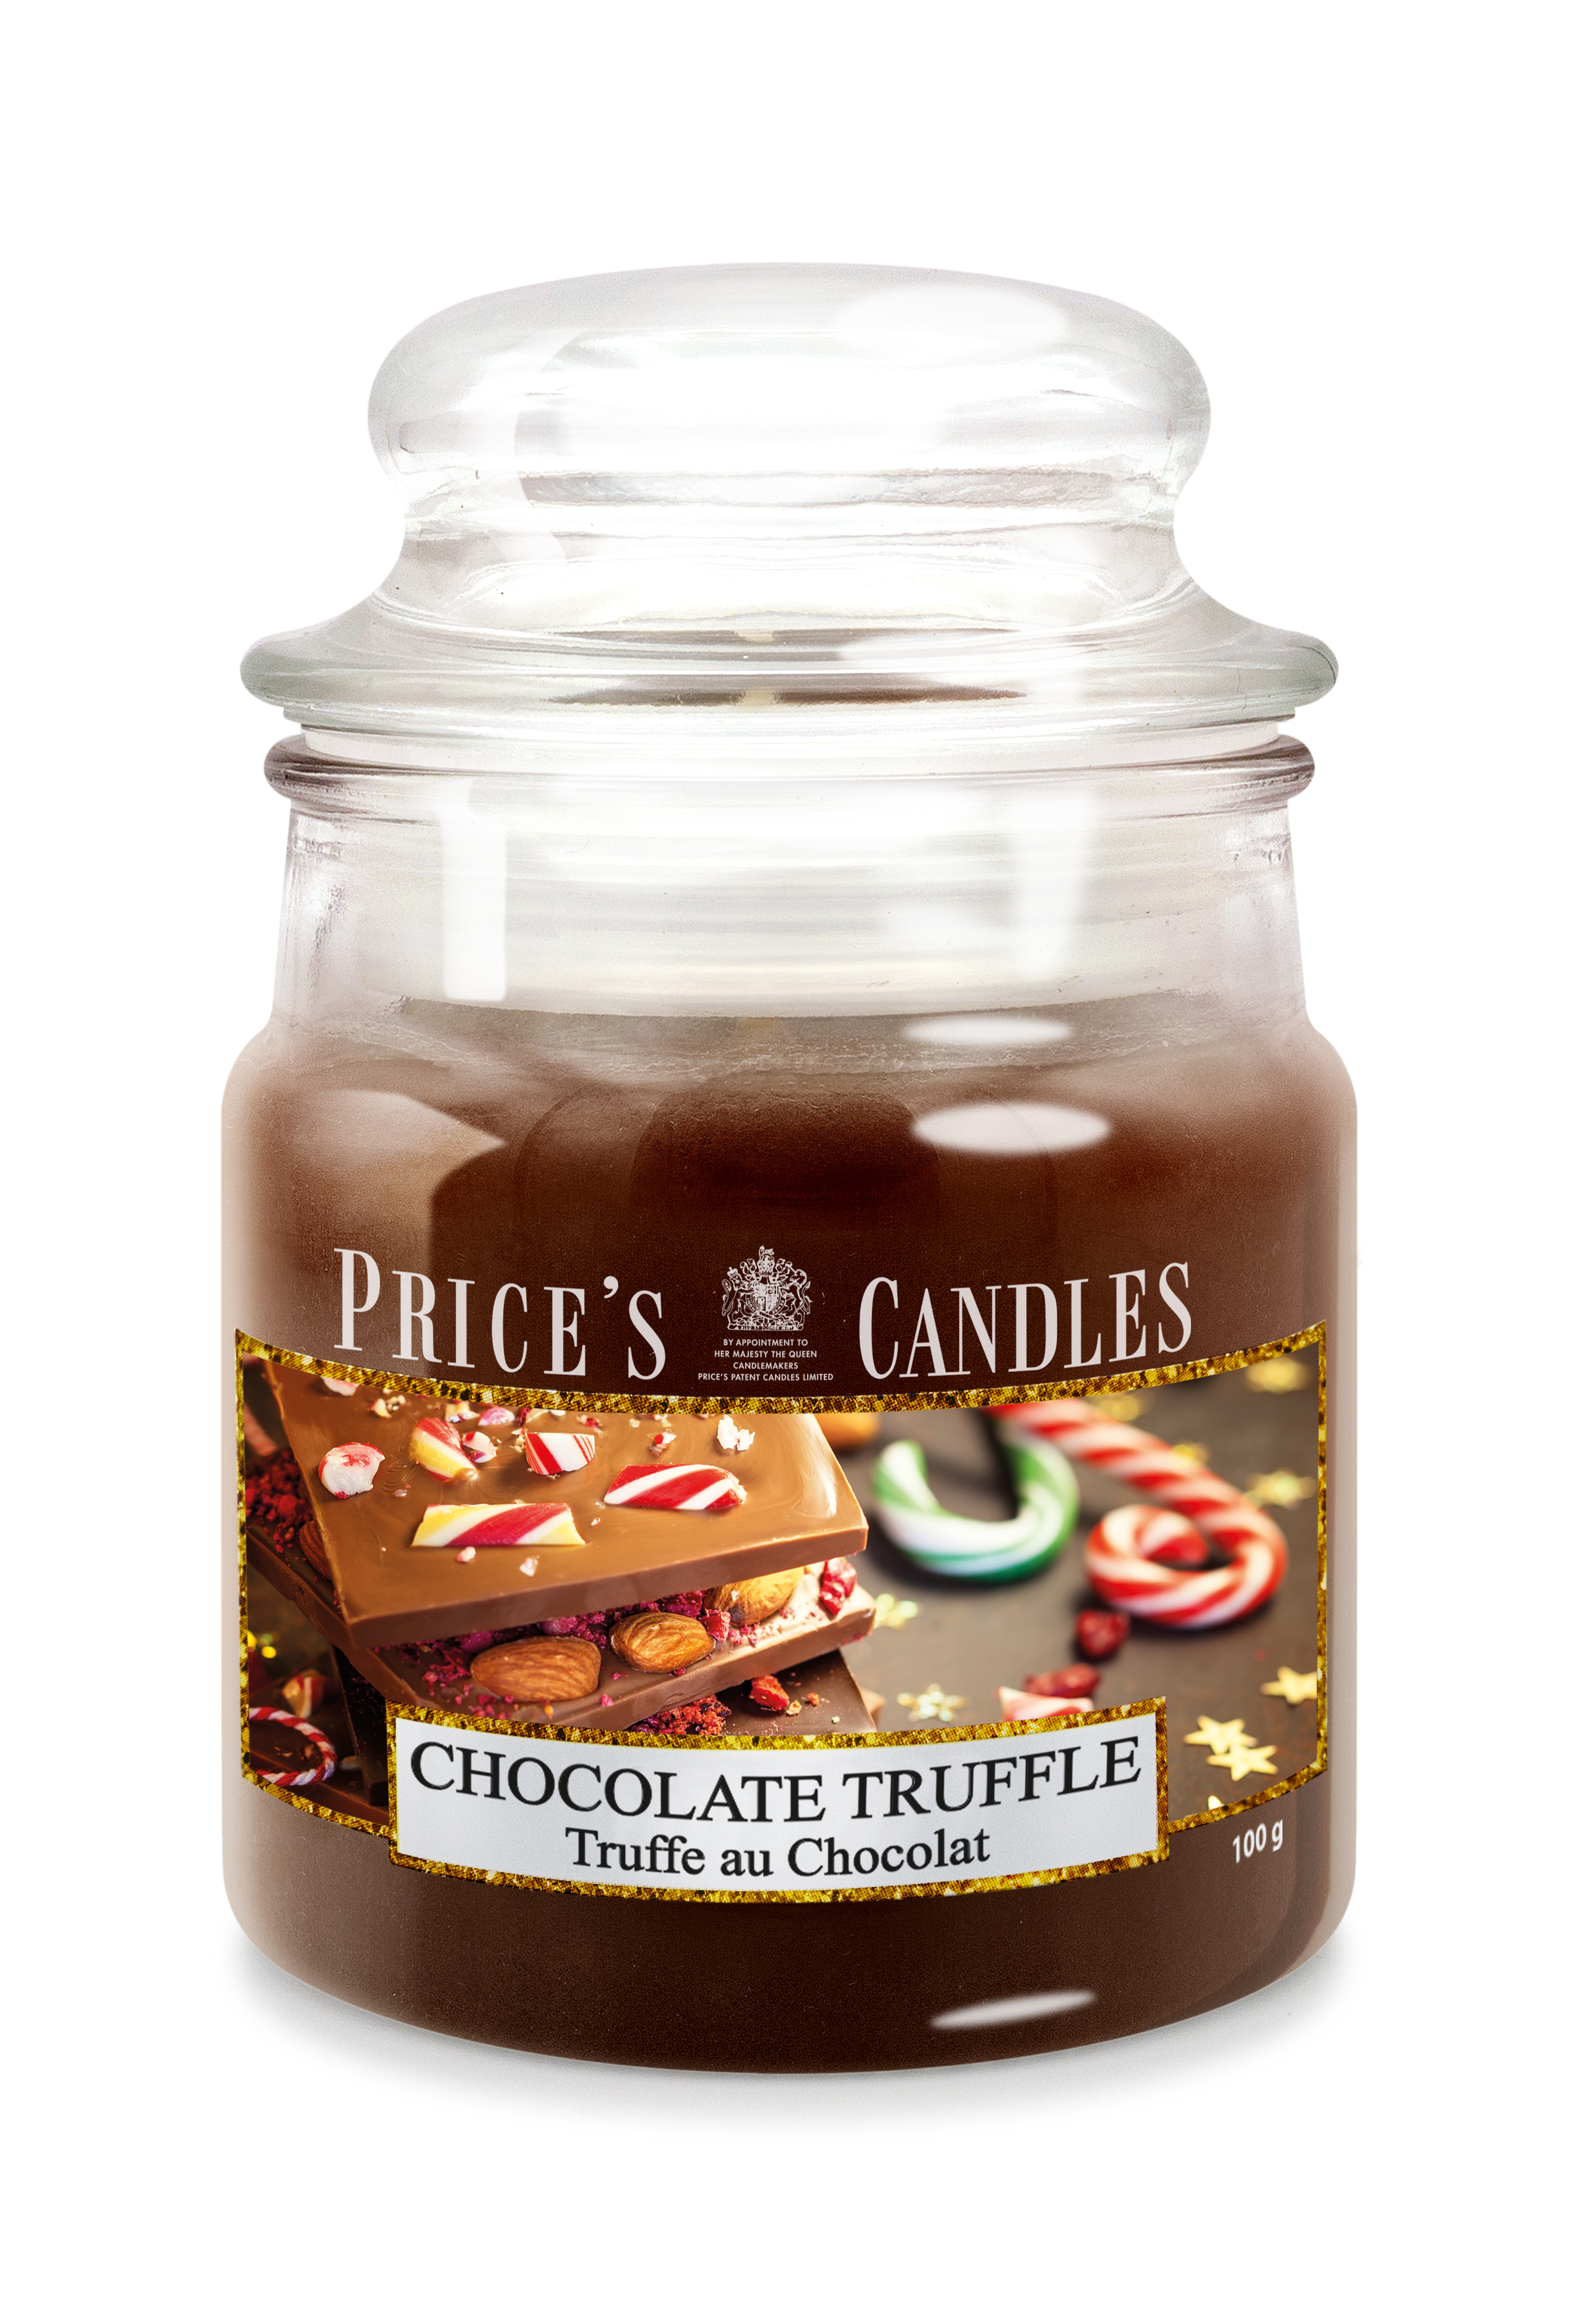 Prices Candle "Chocolate Truffle" 100g  